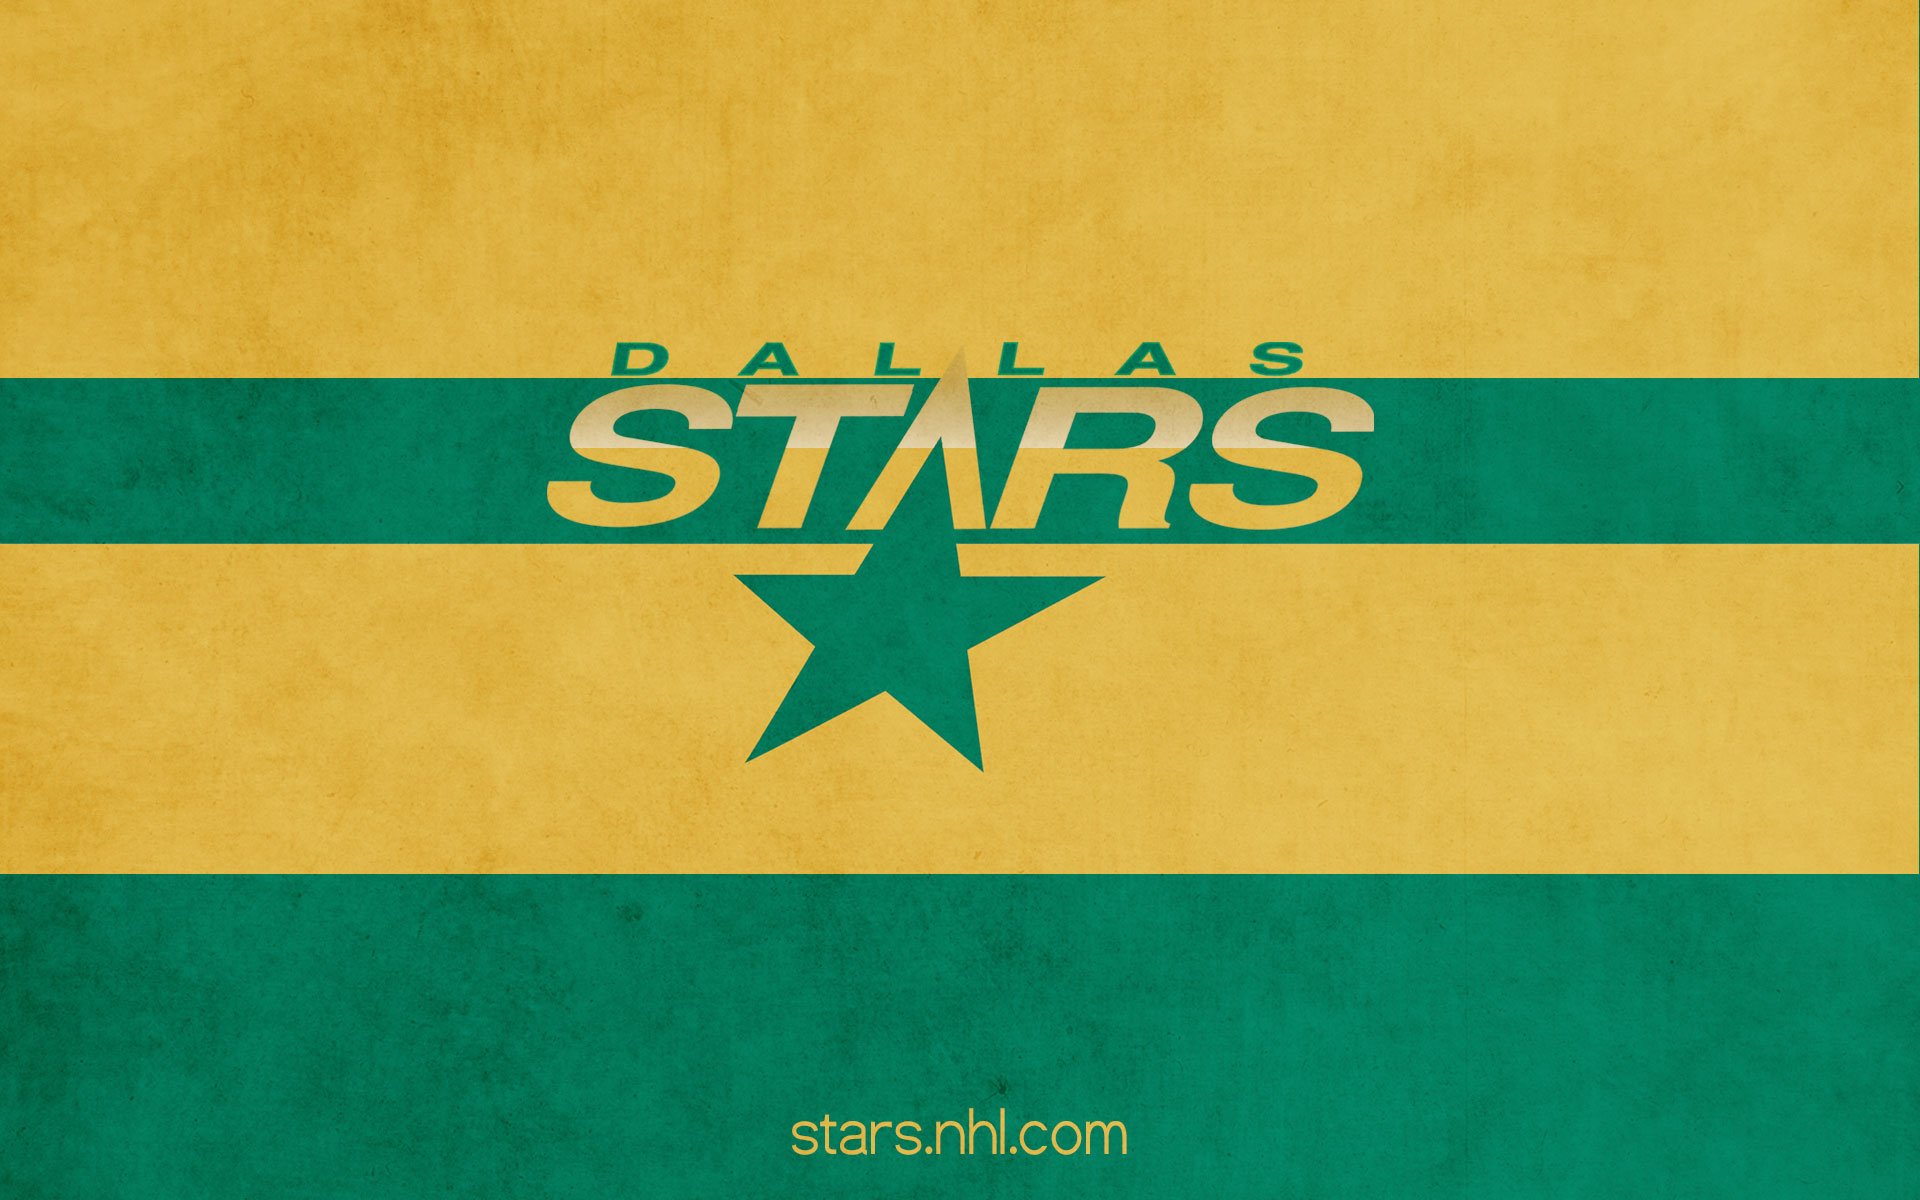 of dallas stars logo logos and find great deals on exclusive dallas